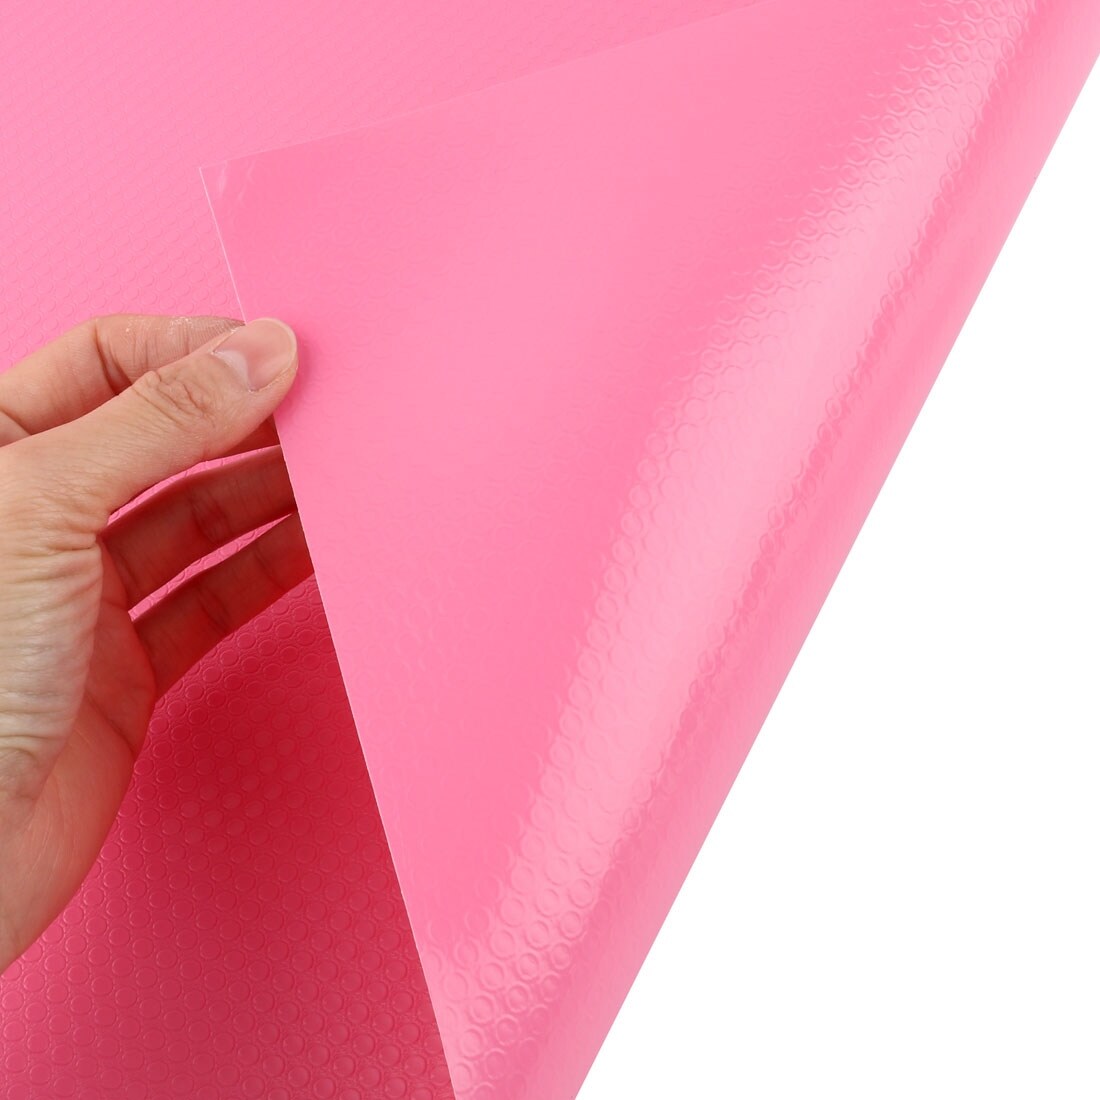 Non Adhesive Cabinet Shelf Paper Drawer Liner Mat Lining Pad Protector -  Pink - Bed Bath & Beyond - 19893008